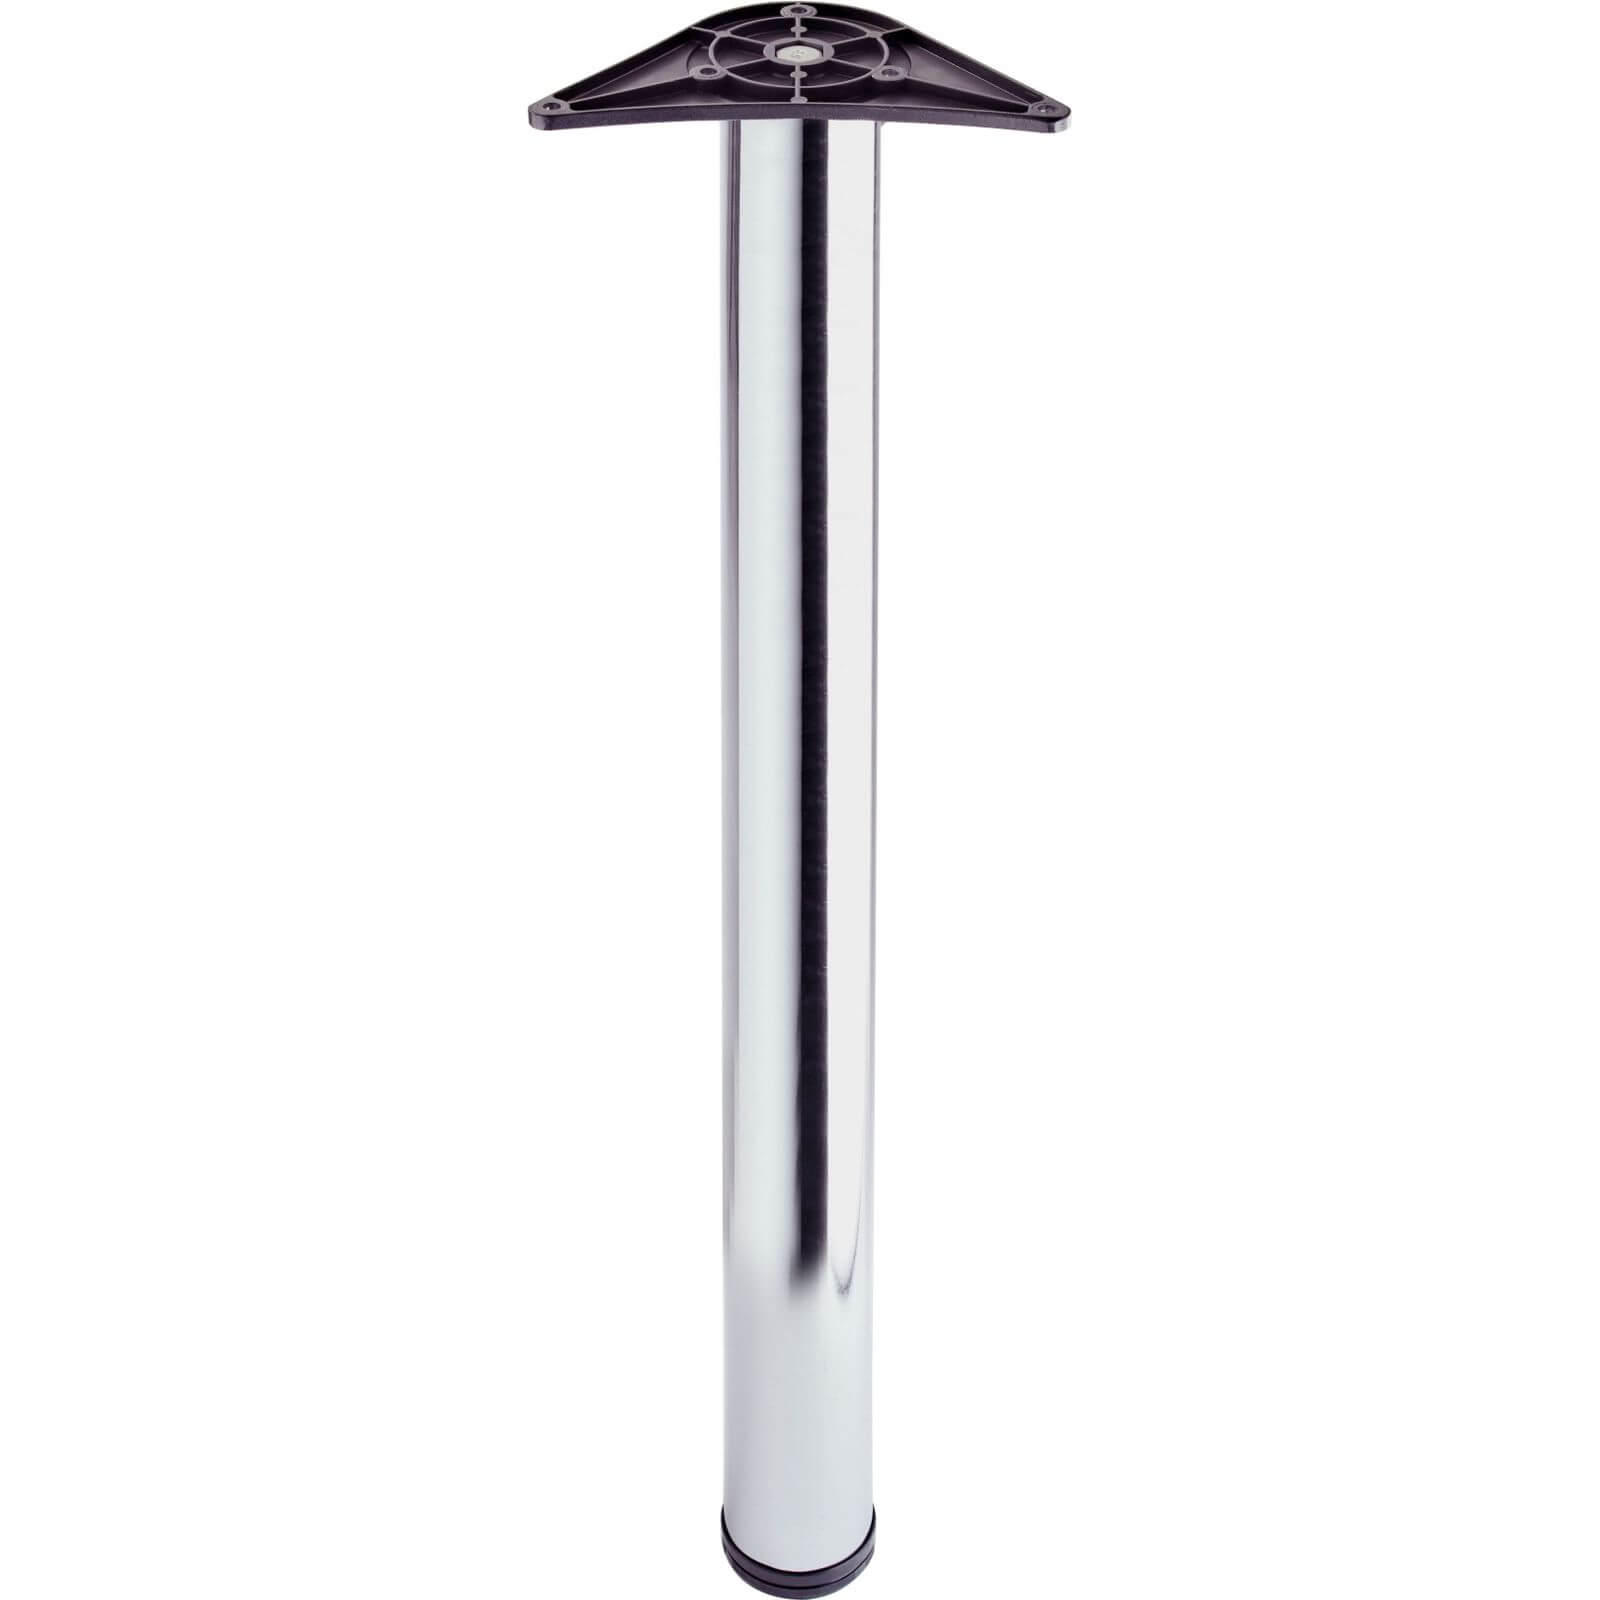 Photo of Worktop Support Leg - Chrome Plated - 60 X 1100mm